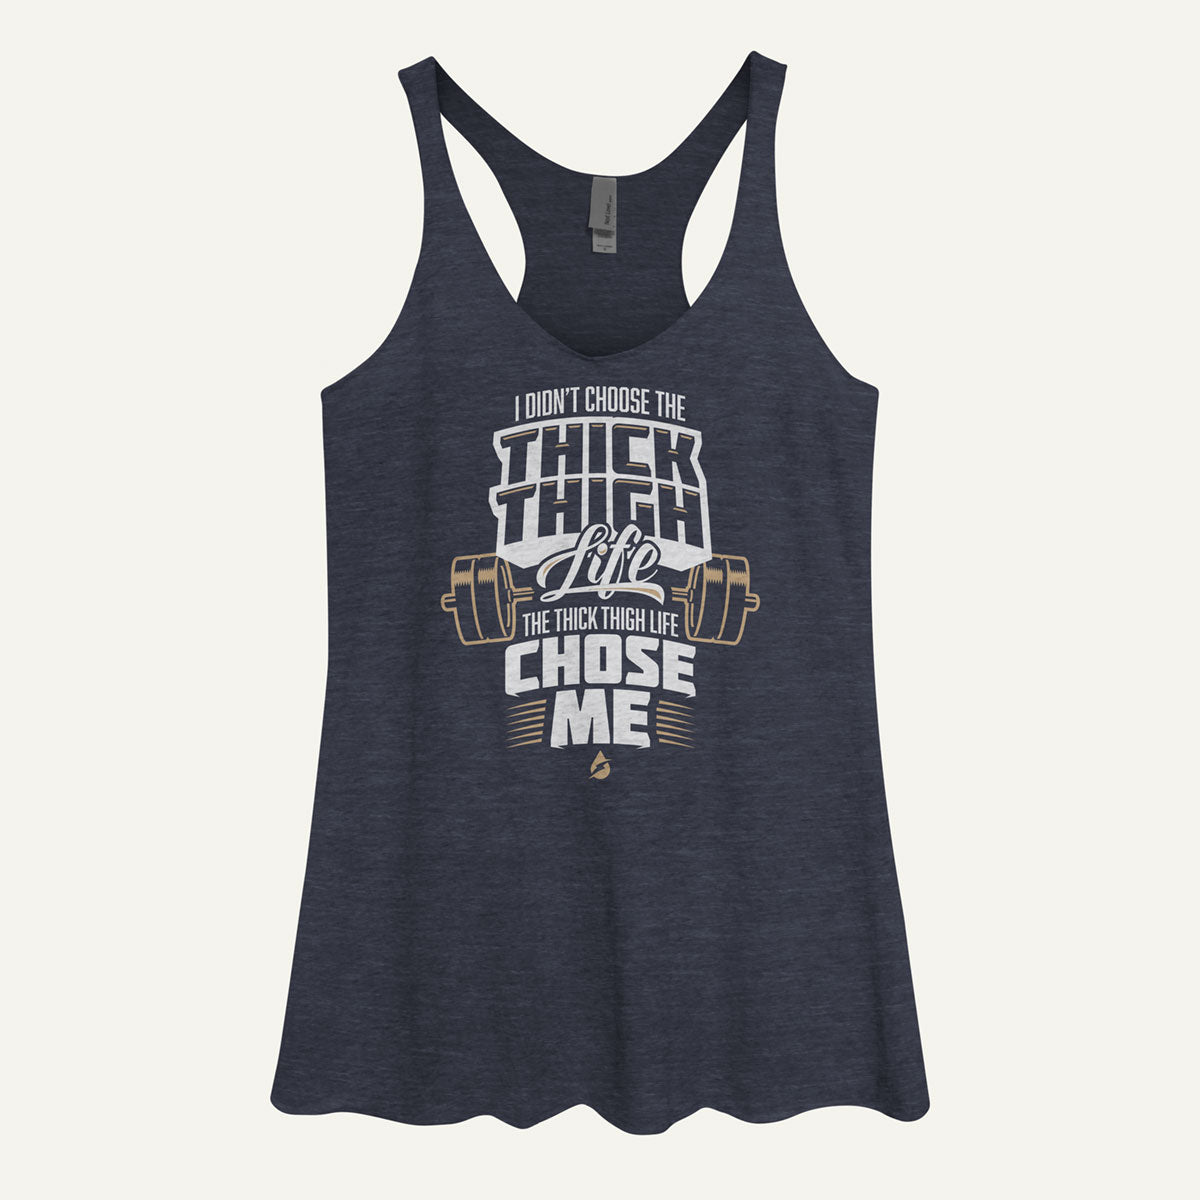 I Didn't Choose The Thick Thigh Life The Thick Thigh Life Chose Me Women's Tank Top